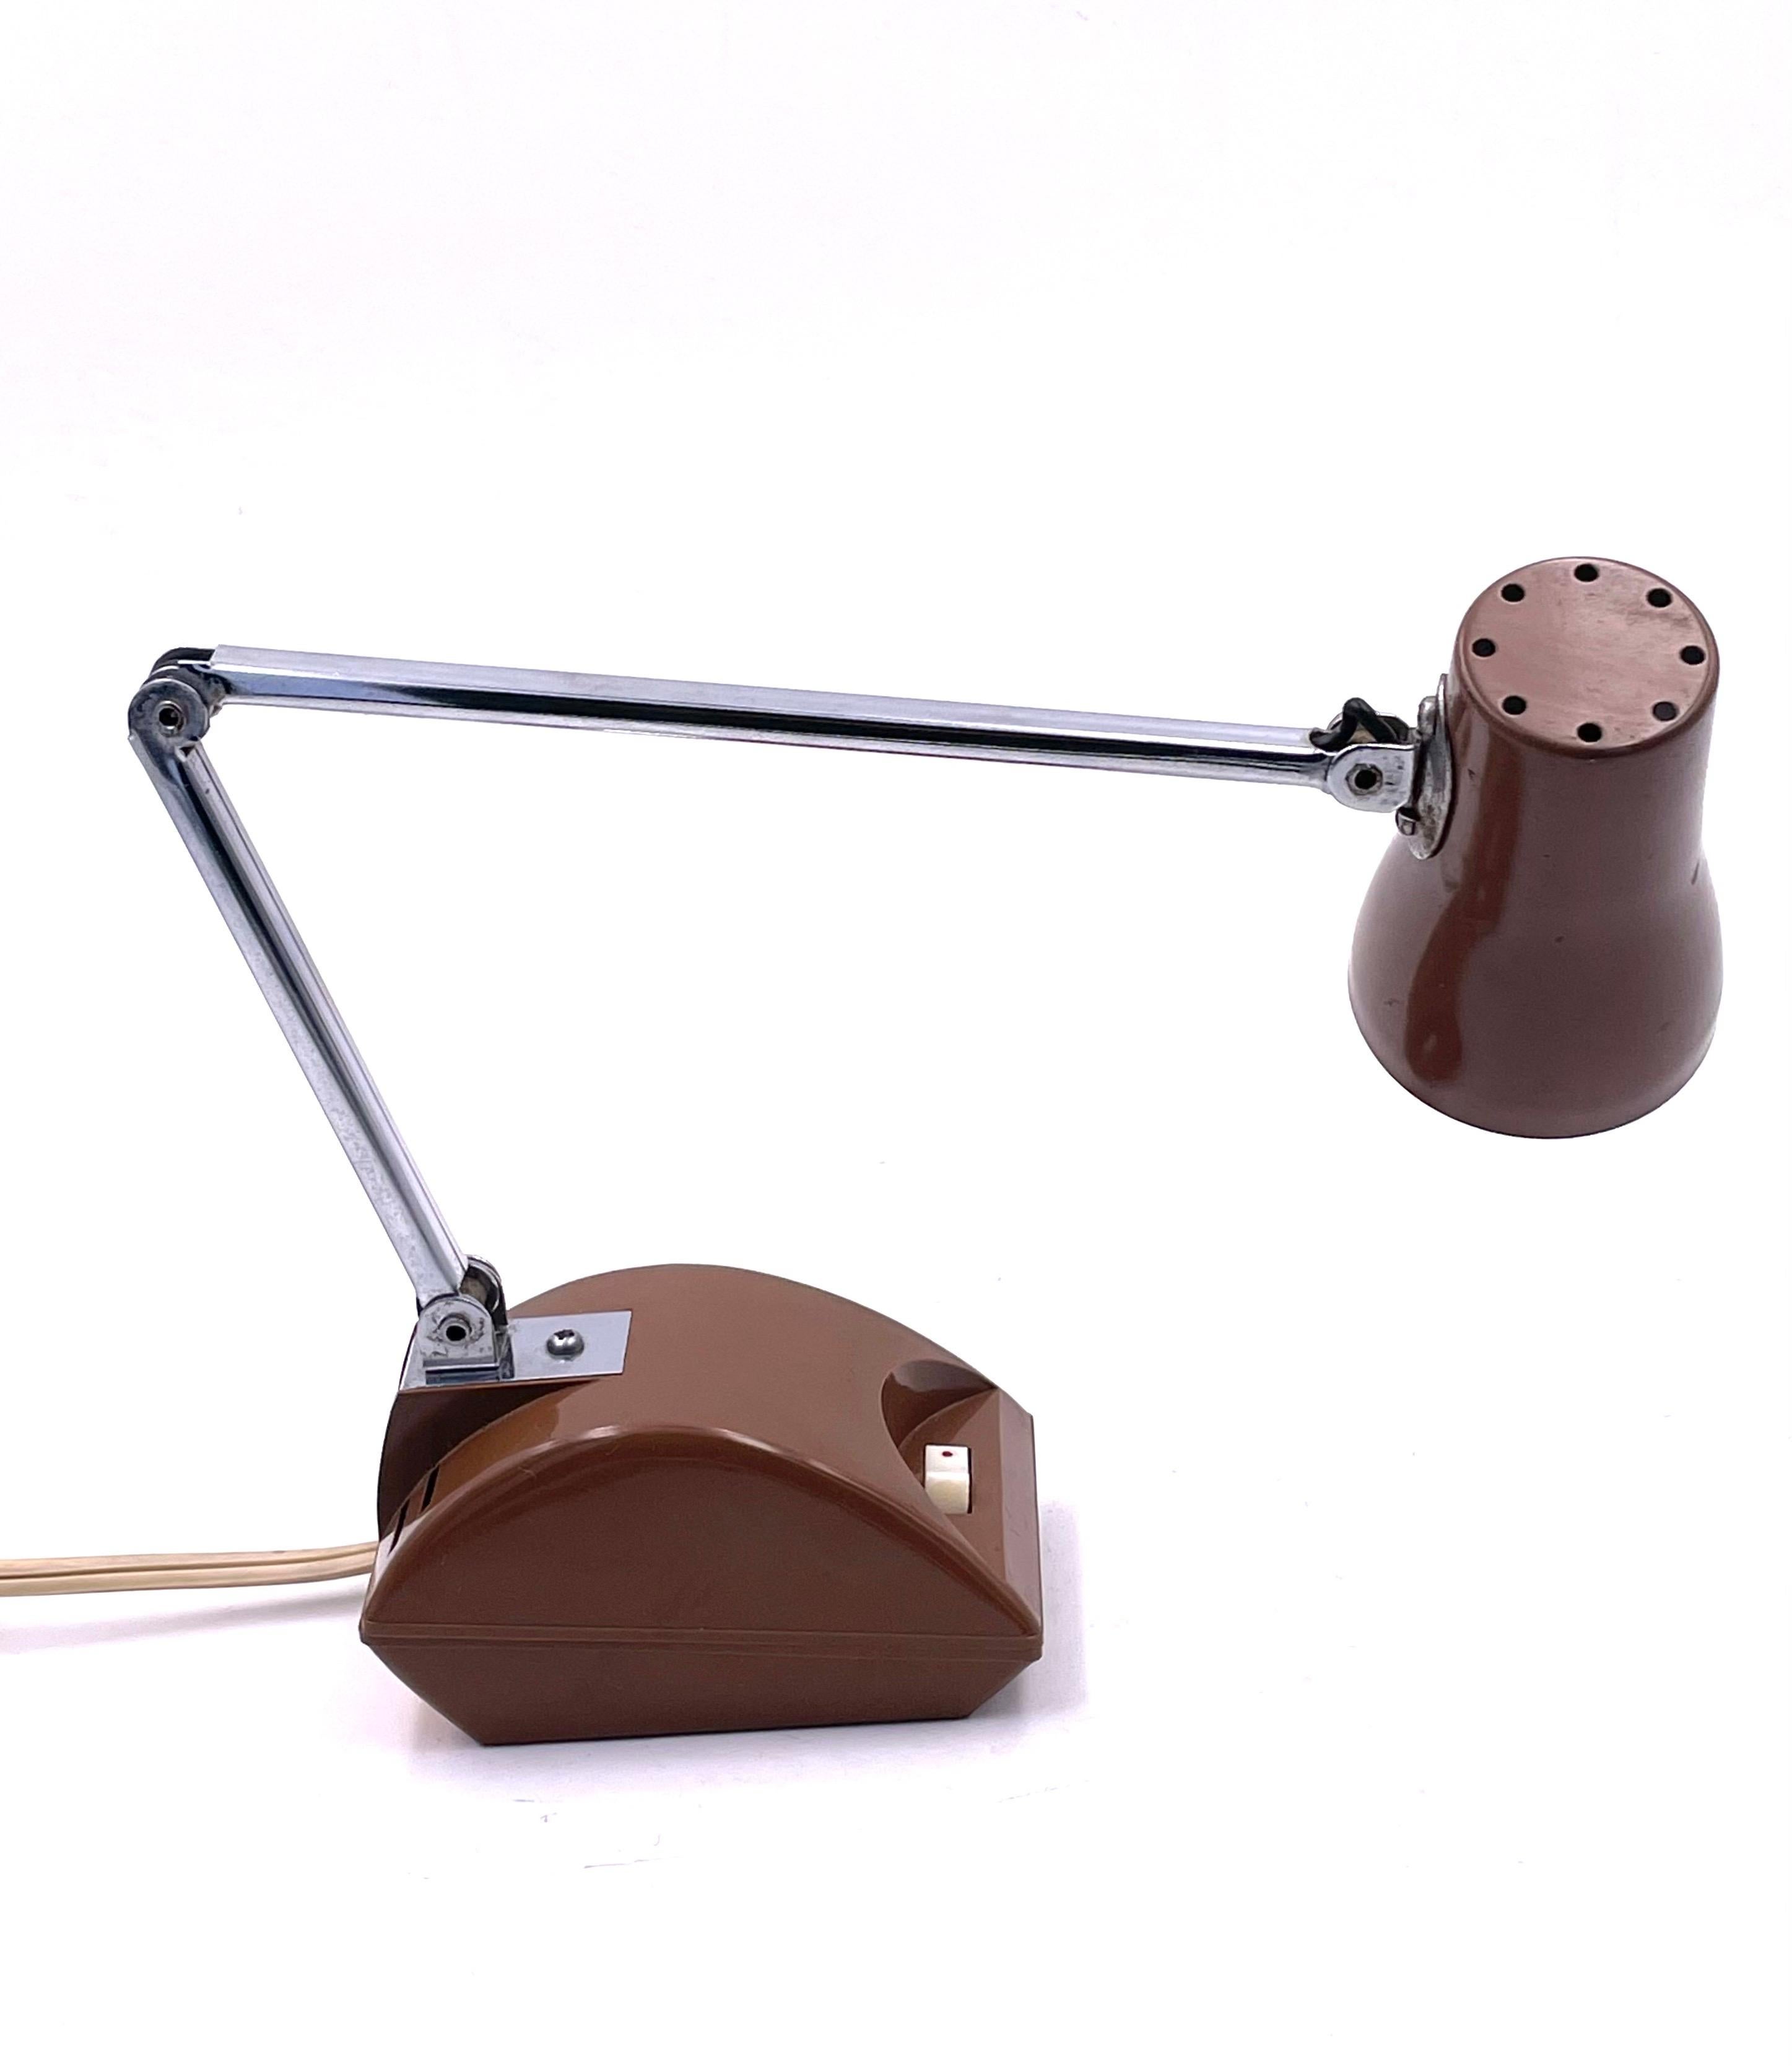 Petite Desk Lamp Multidirectional Space Age Era In Excellent Condition For Sale In San Diego, CA